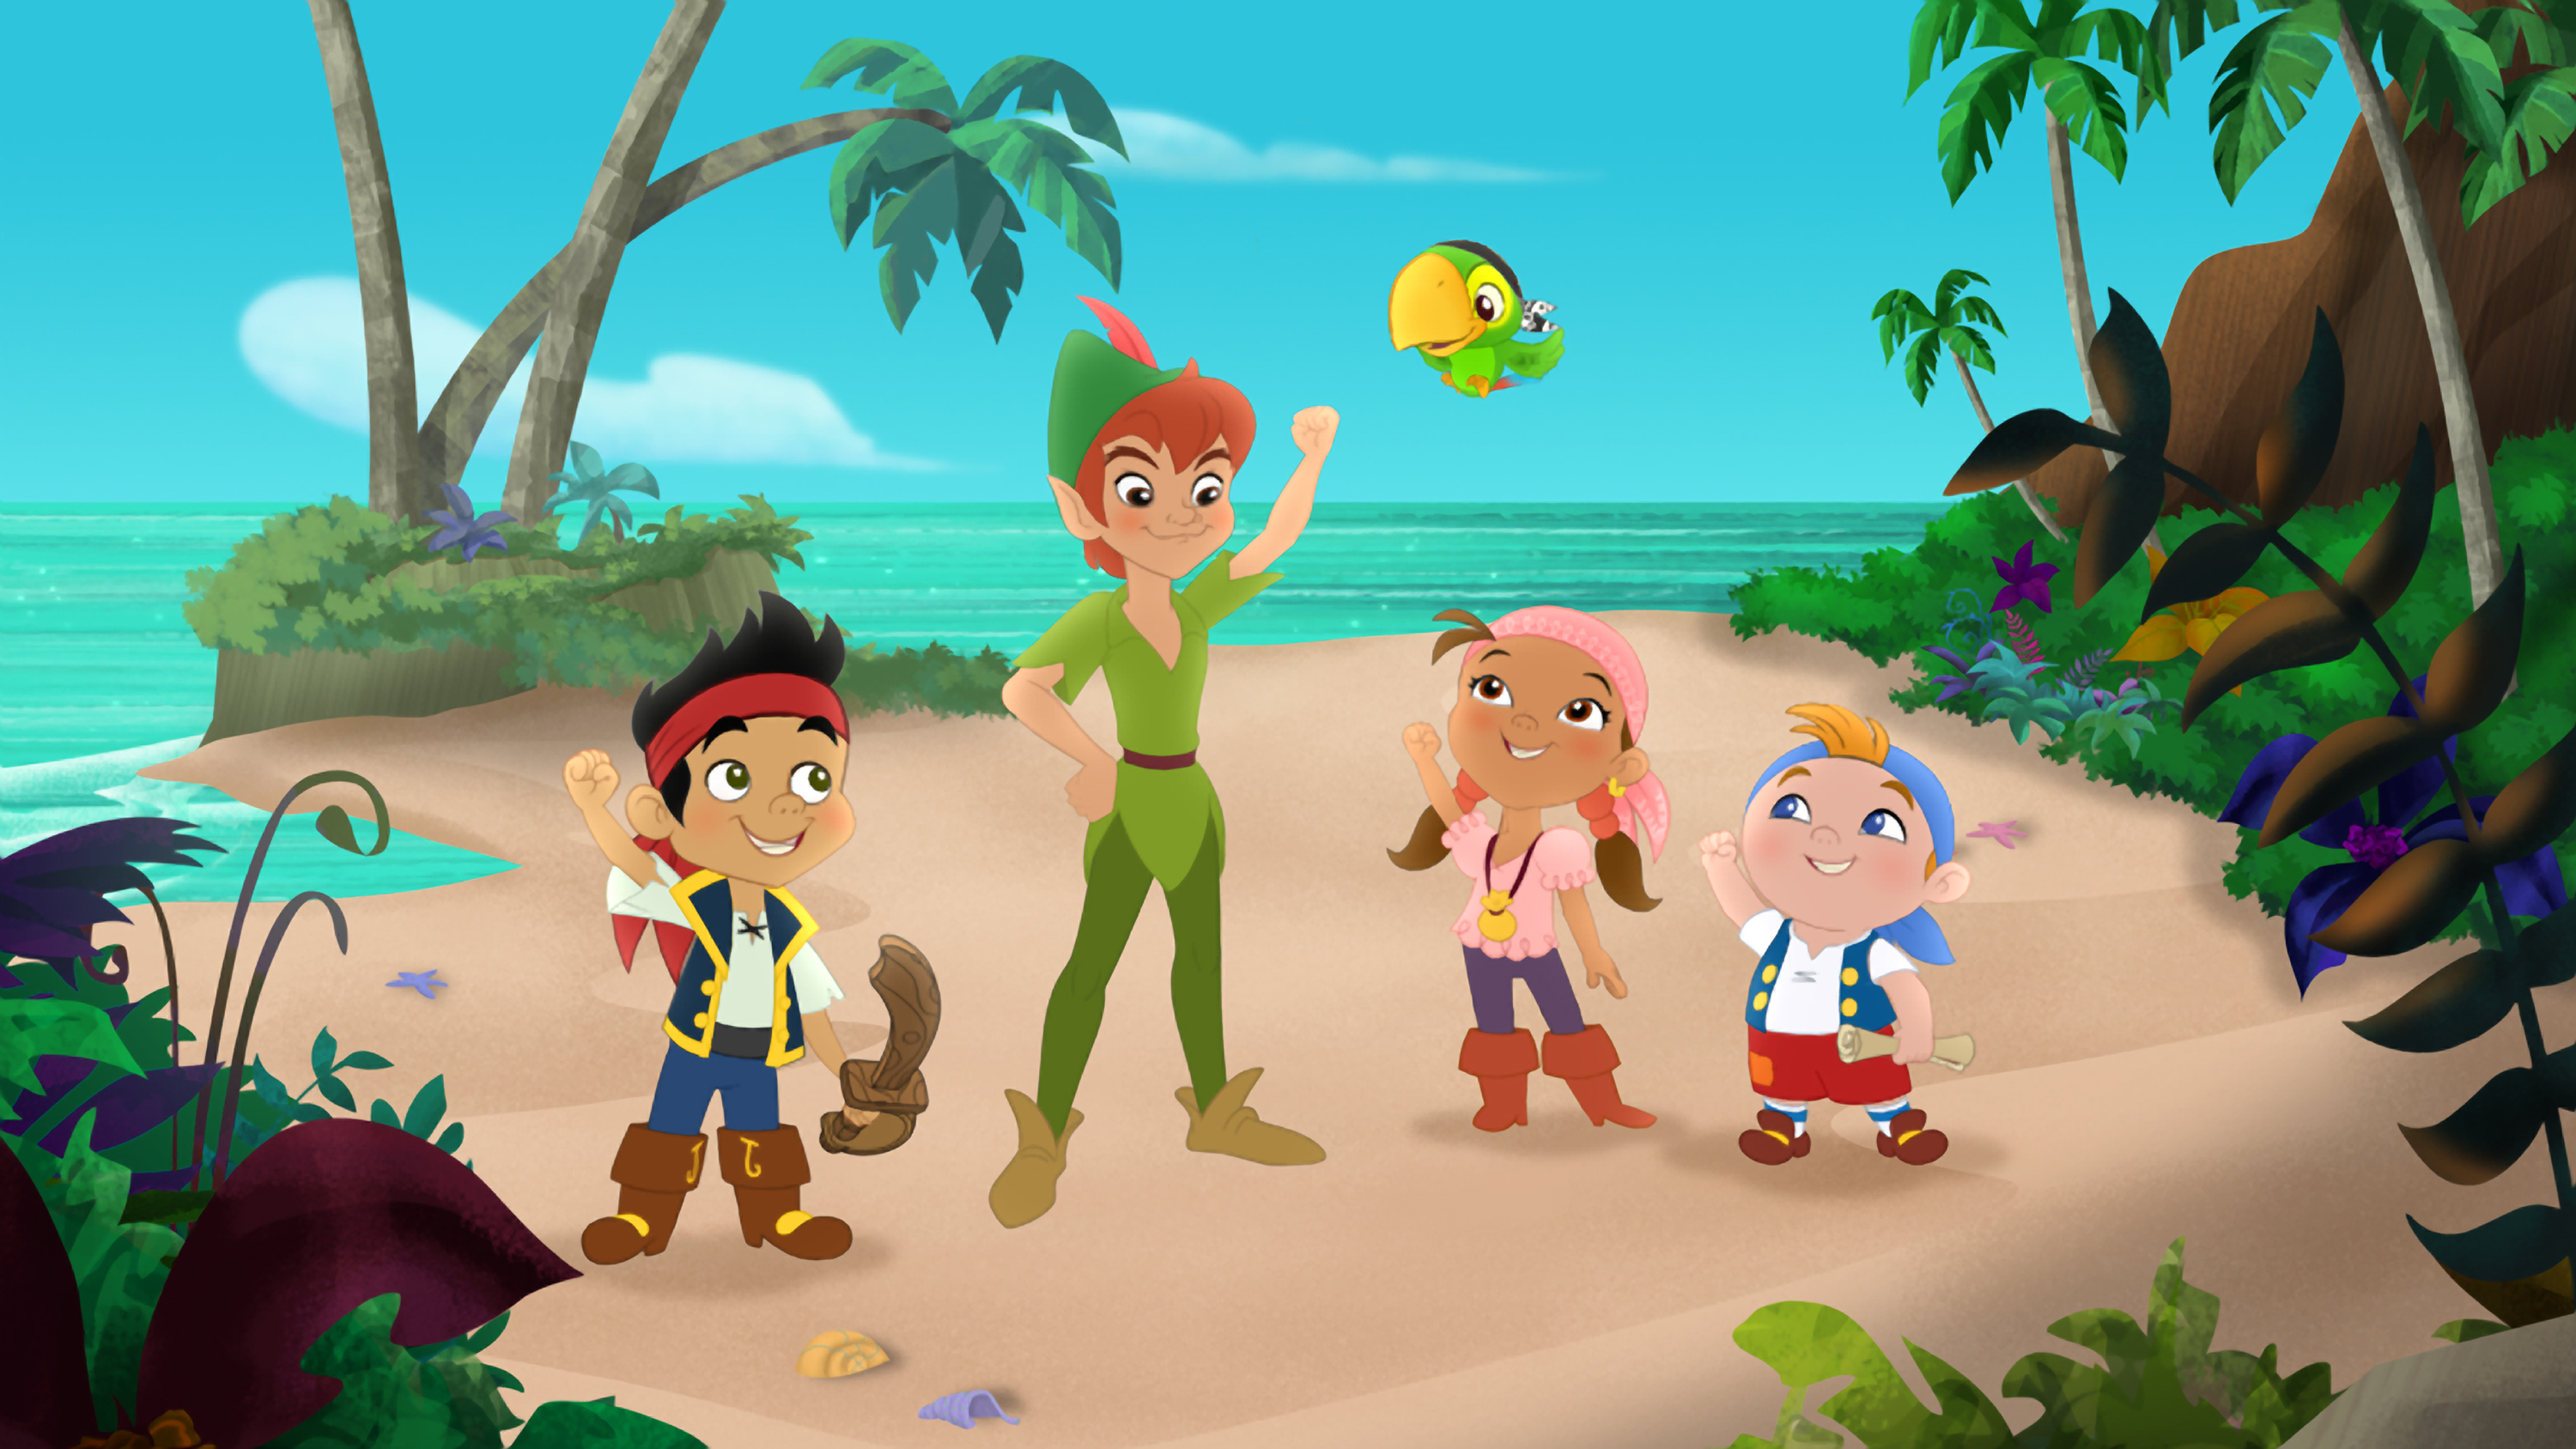 Https www sippycupmom com jake and the never land pirates peter pan...